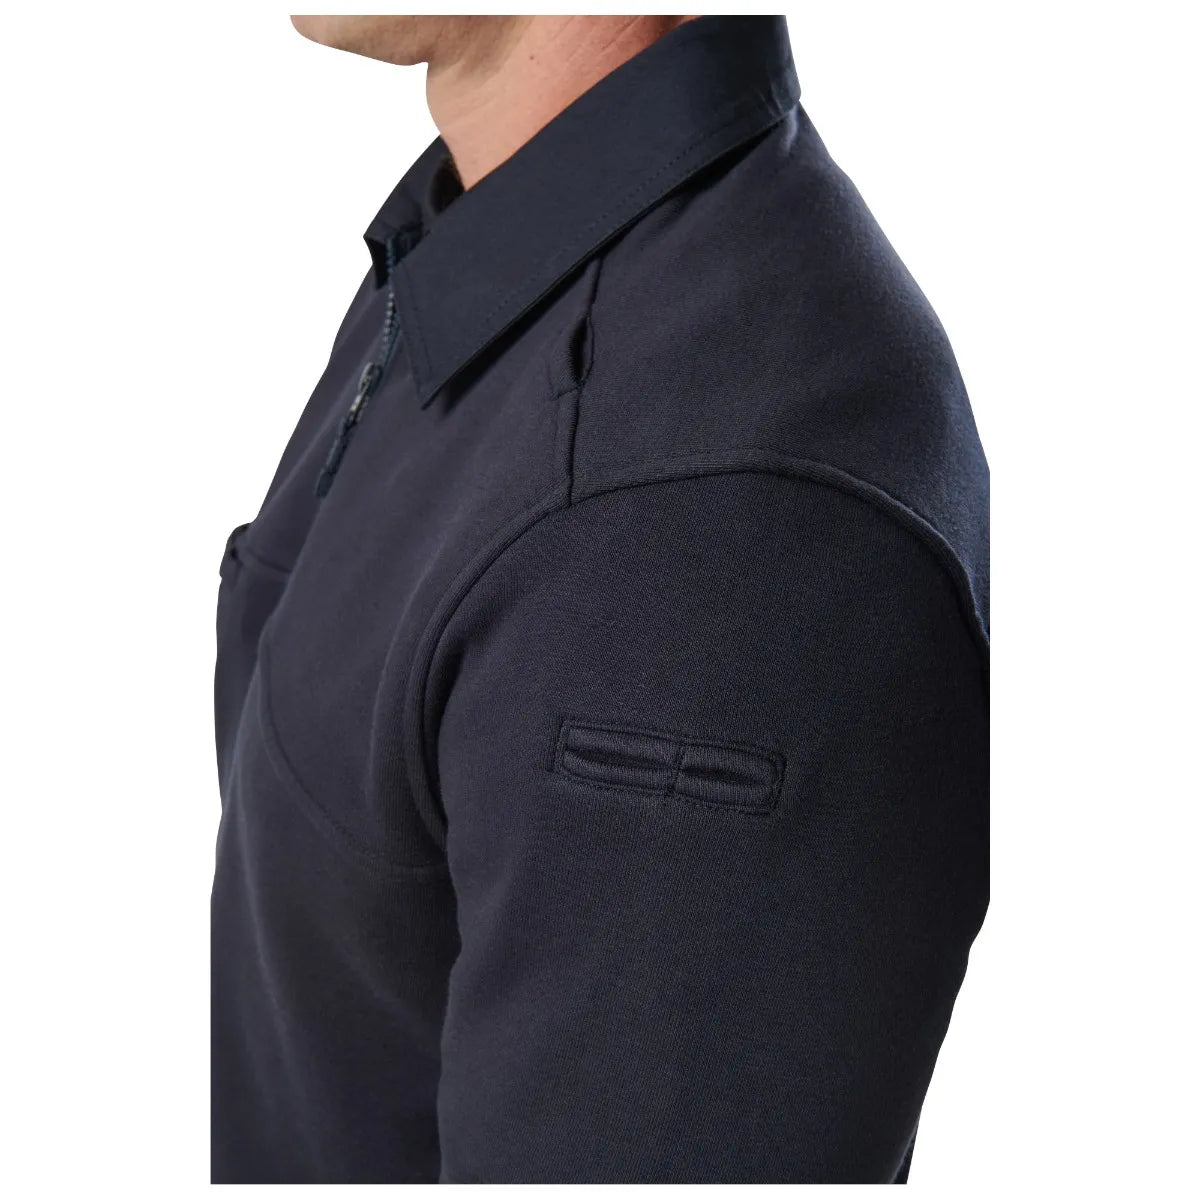 5.11 Tactical JOB SHIRT WITH CANVAS 2.0 72535 - Newest Products